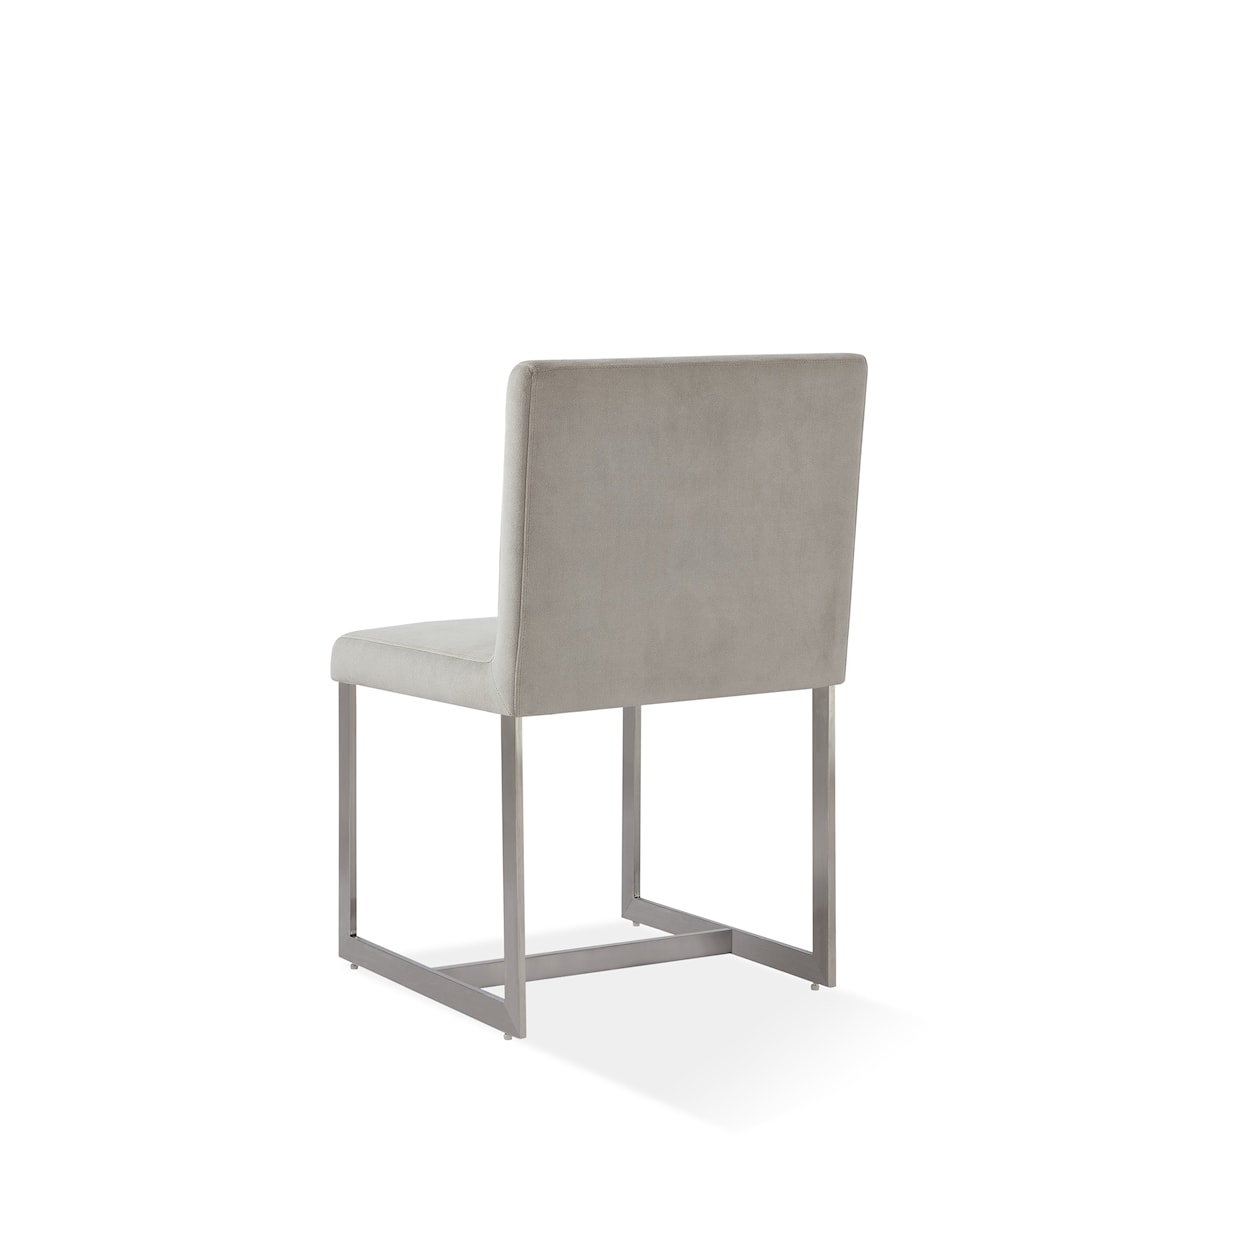 Modus International Eliza Upholstered Dining Chair